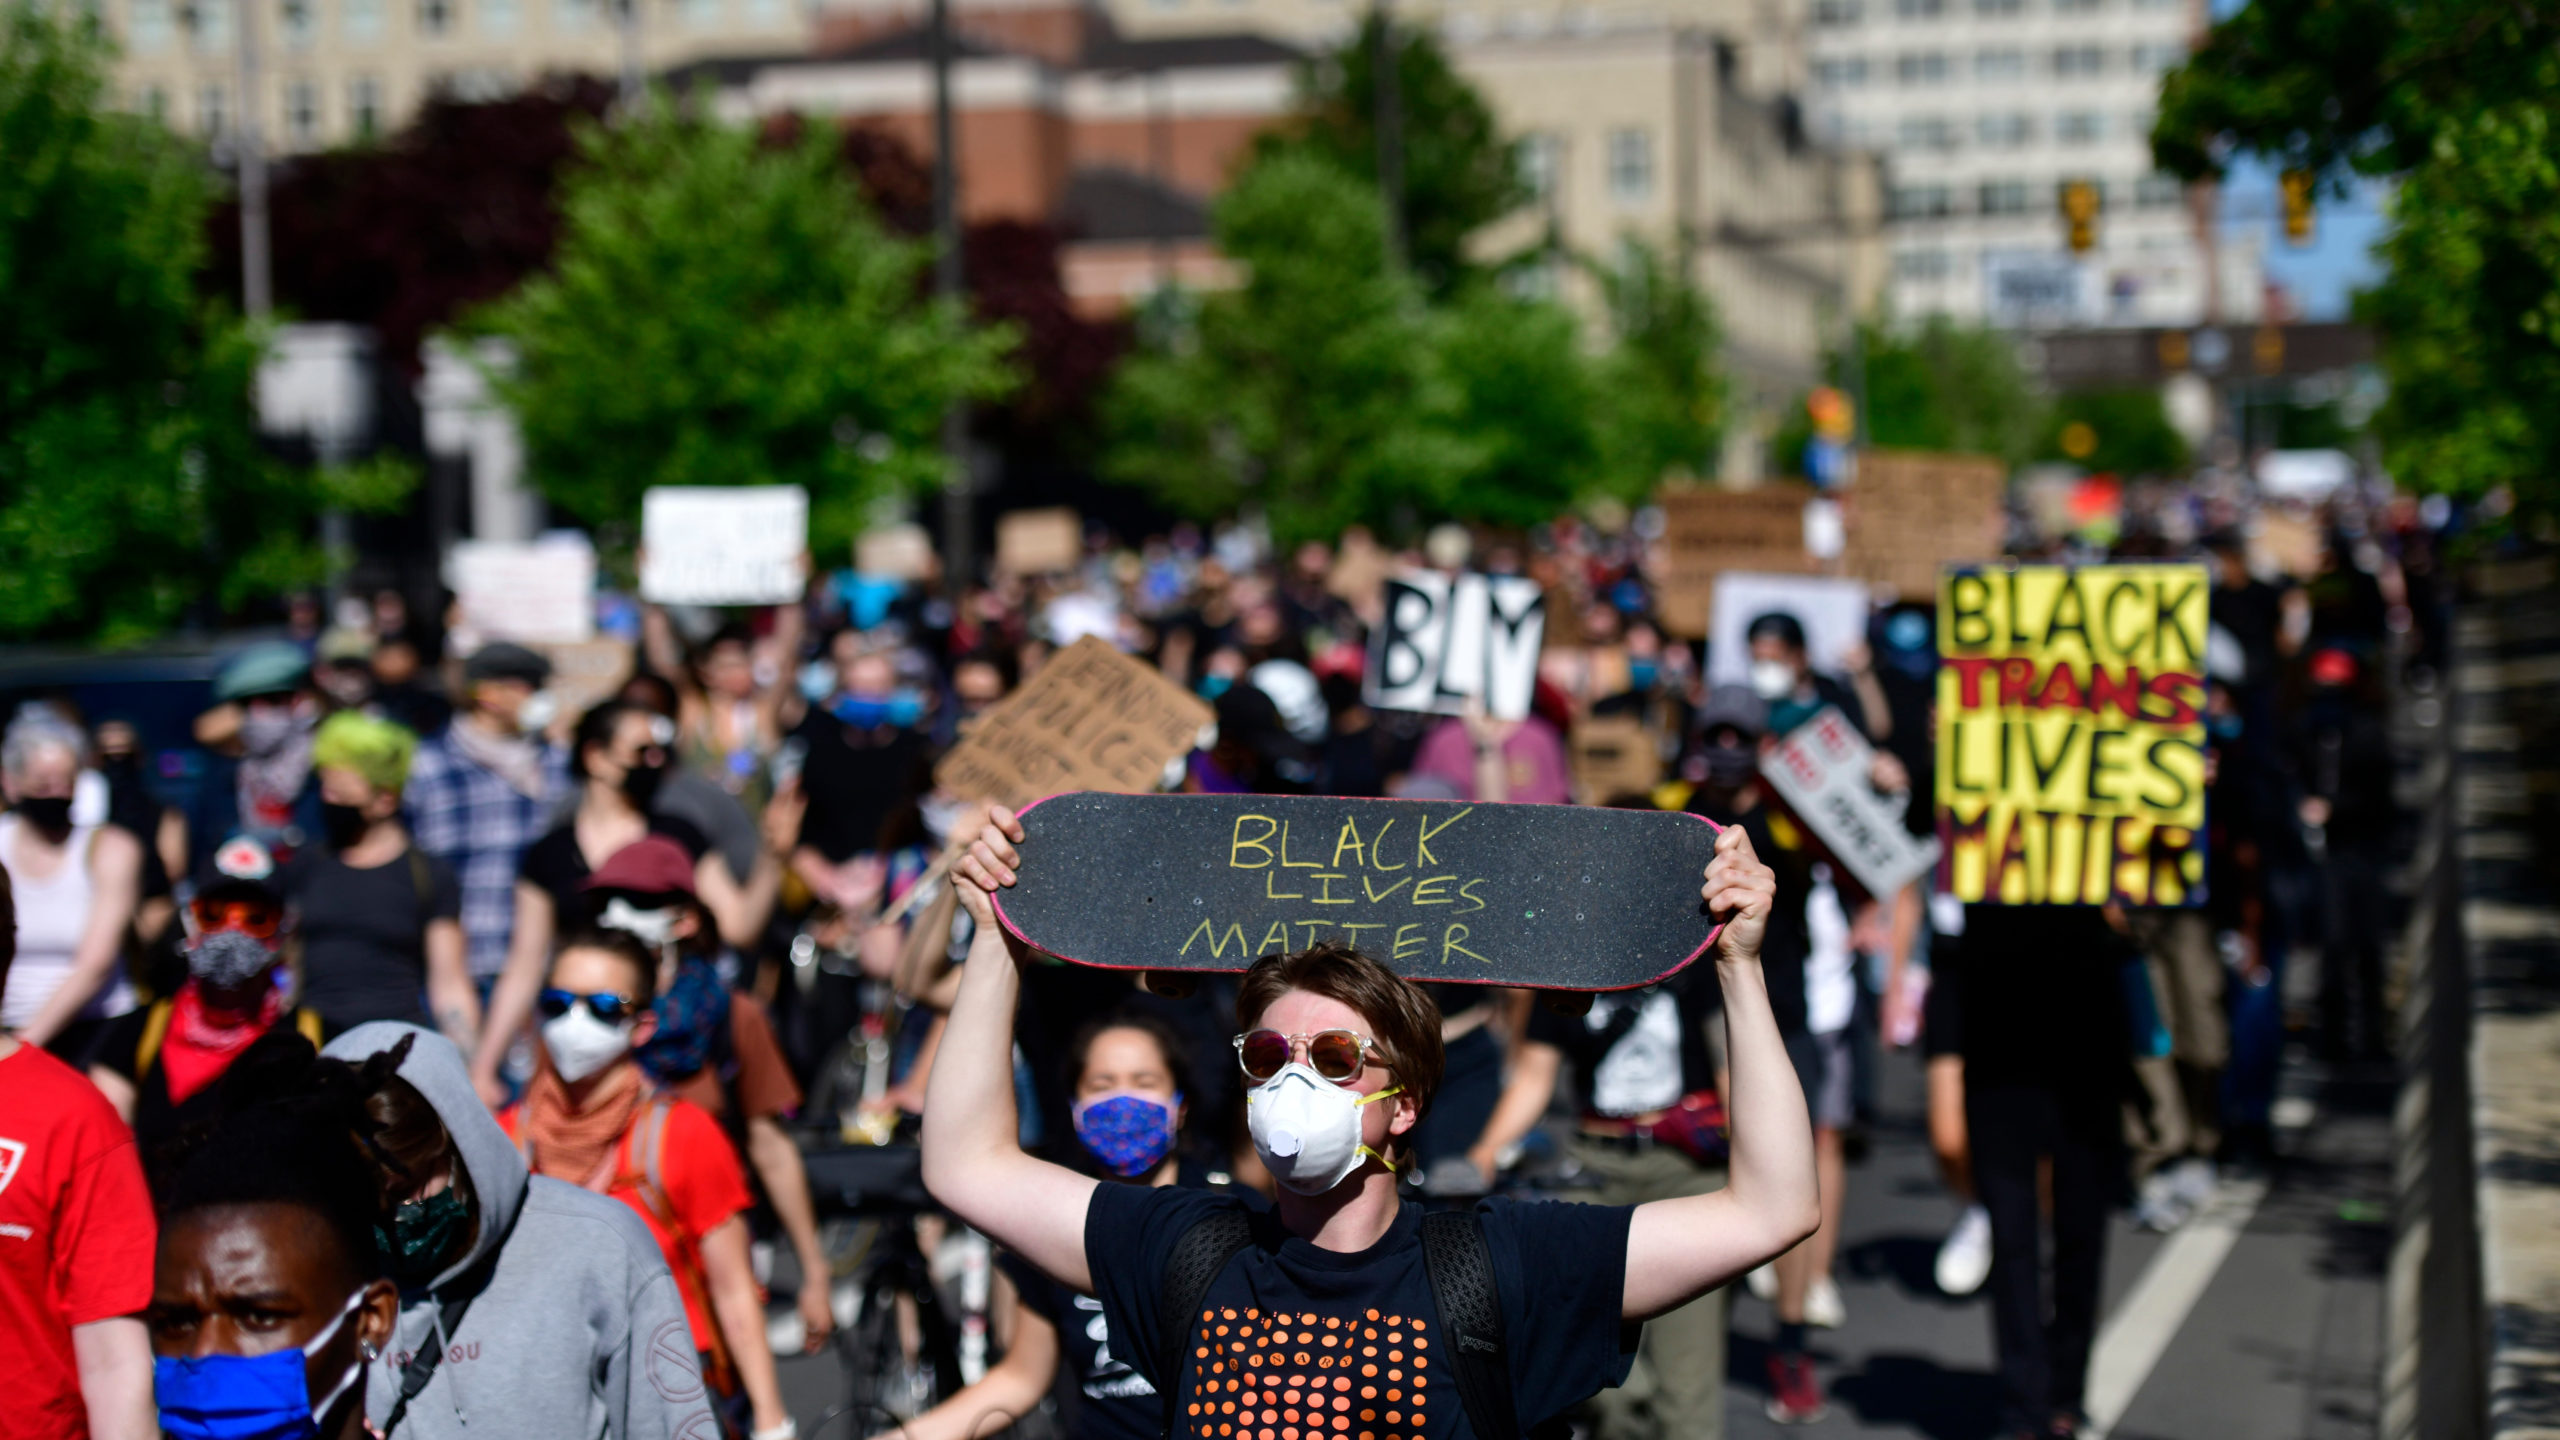 Protesters march in Philadelphia's Centre City neighbourhood on June 1, 2020. (Photo: Mark Makela, Getty Images)